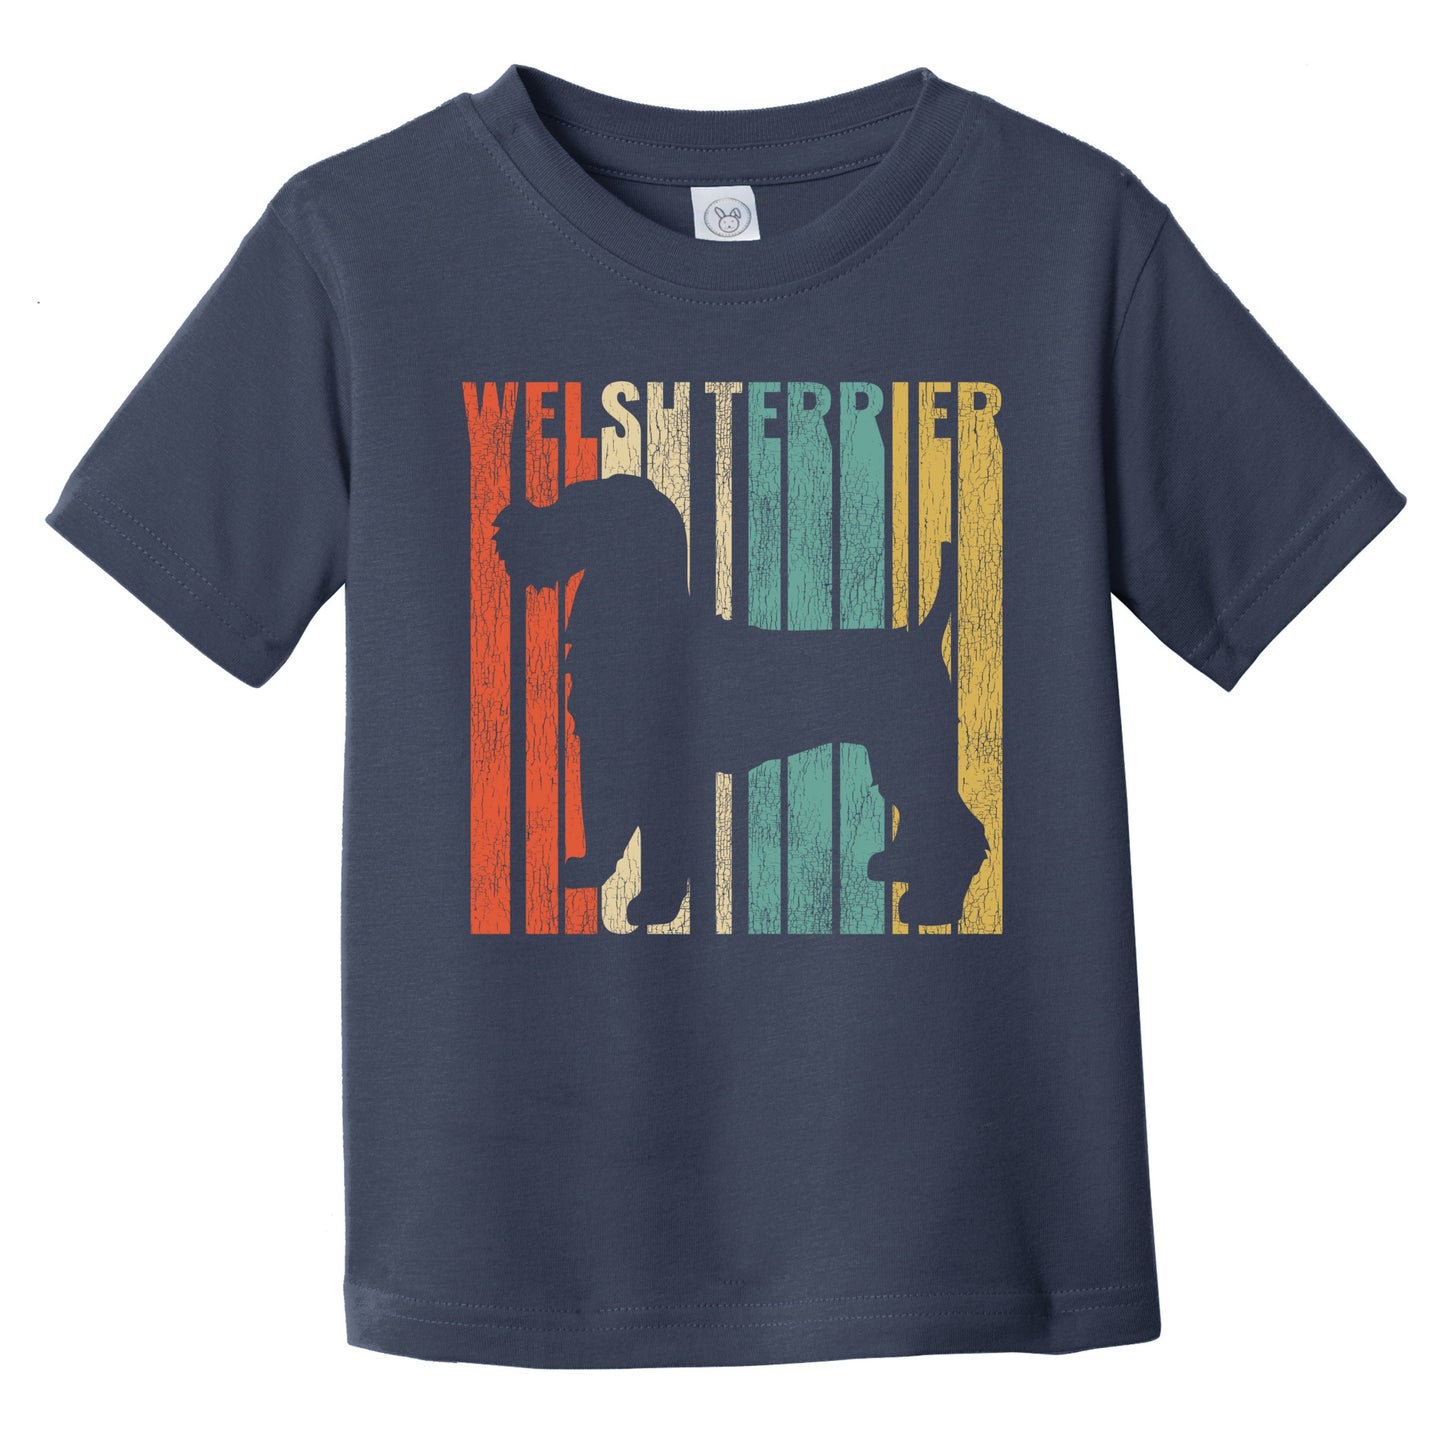 Retro Welsh Terrier Dog Silhouette Cracked Distressed Infant Toddler T-Shirt